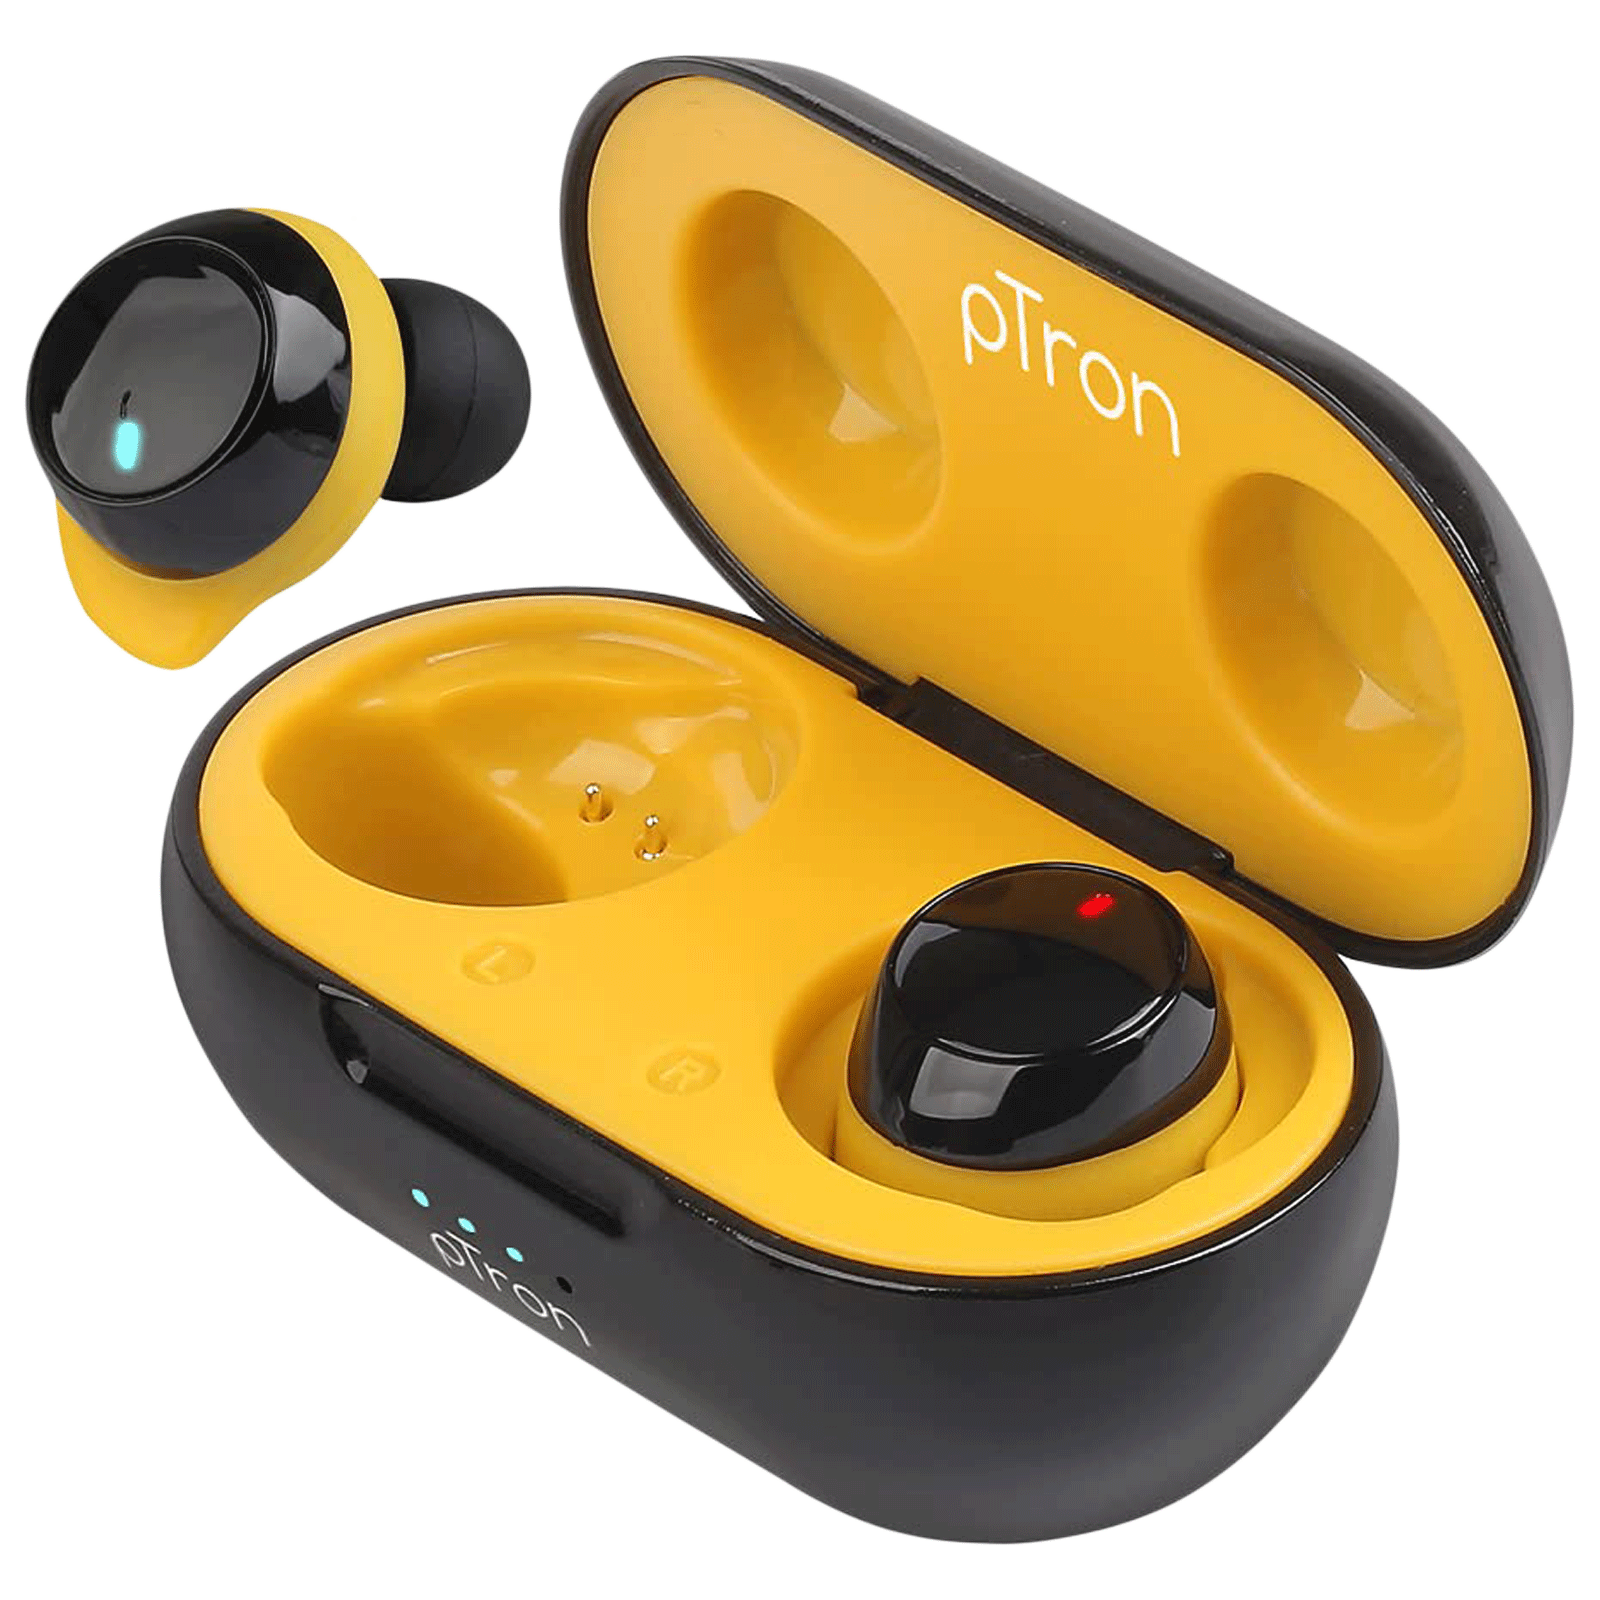 pTron Bassbuds Evo 140317861 In-Ear Passive Noise Cancellation Truly Wireless Earbuds with Mic (Bluetooth 5.0, Stereo Sound, Black/Yellow)_1